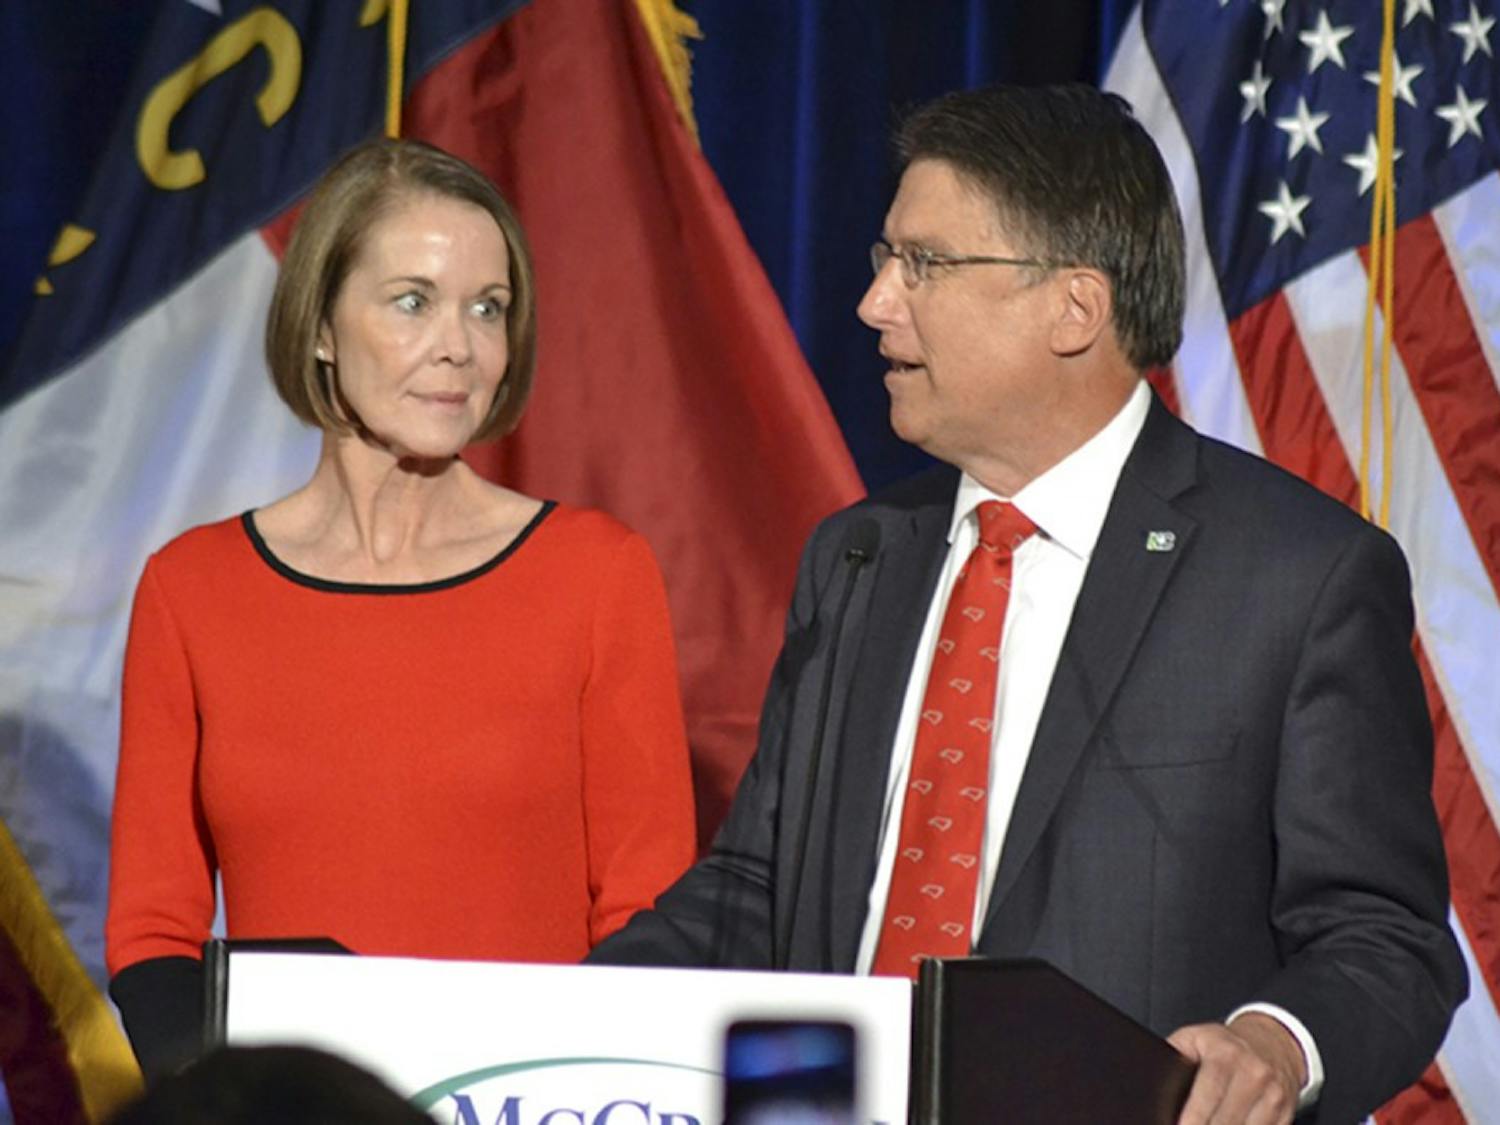 The state of&nbsp;North Carolina and Bob Hall have been investigating former governor Pat&nbsp;McCrory's claims of voter fraud and have found the false charges of fraud were harmful to voters.